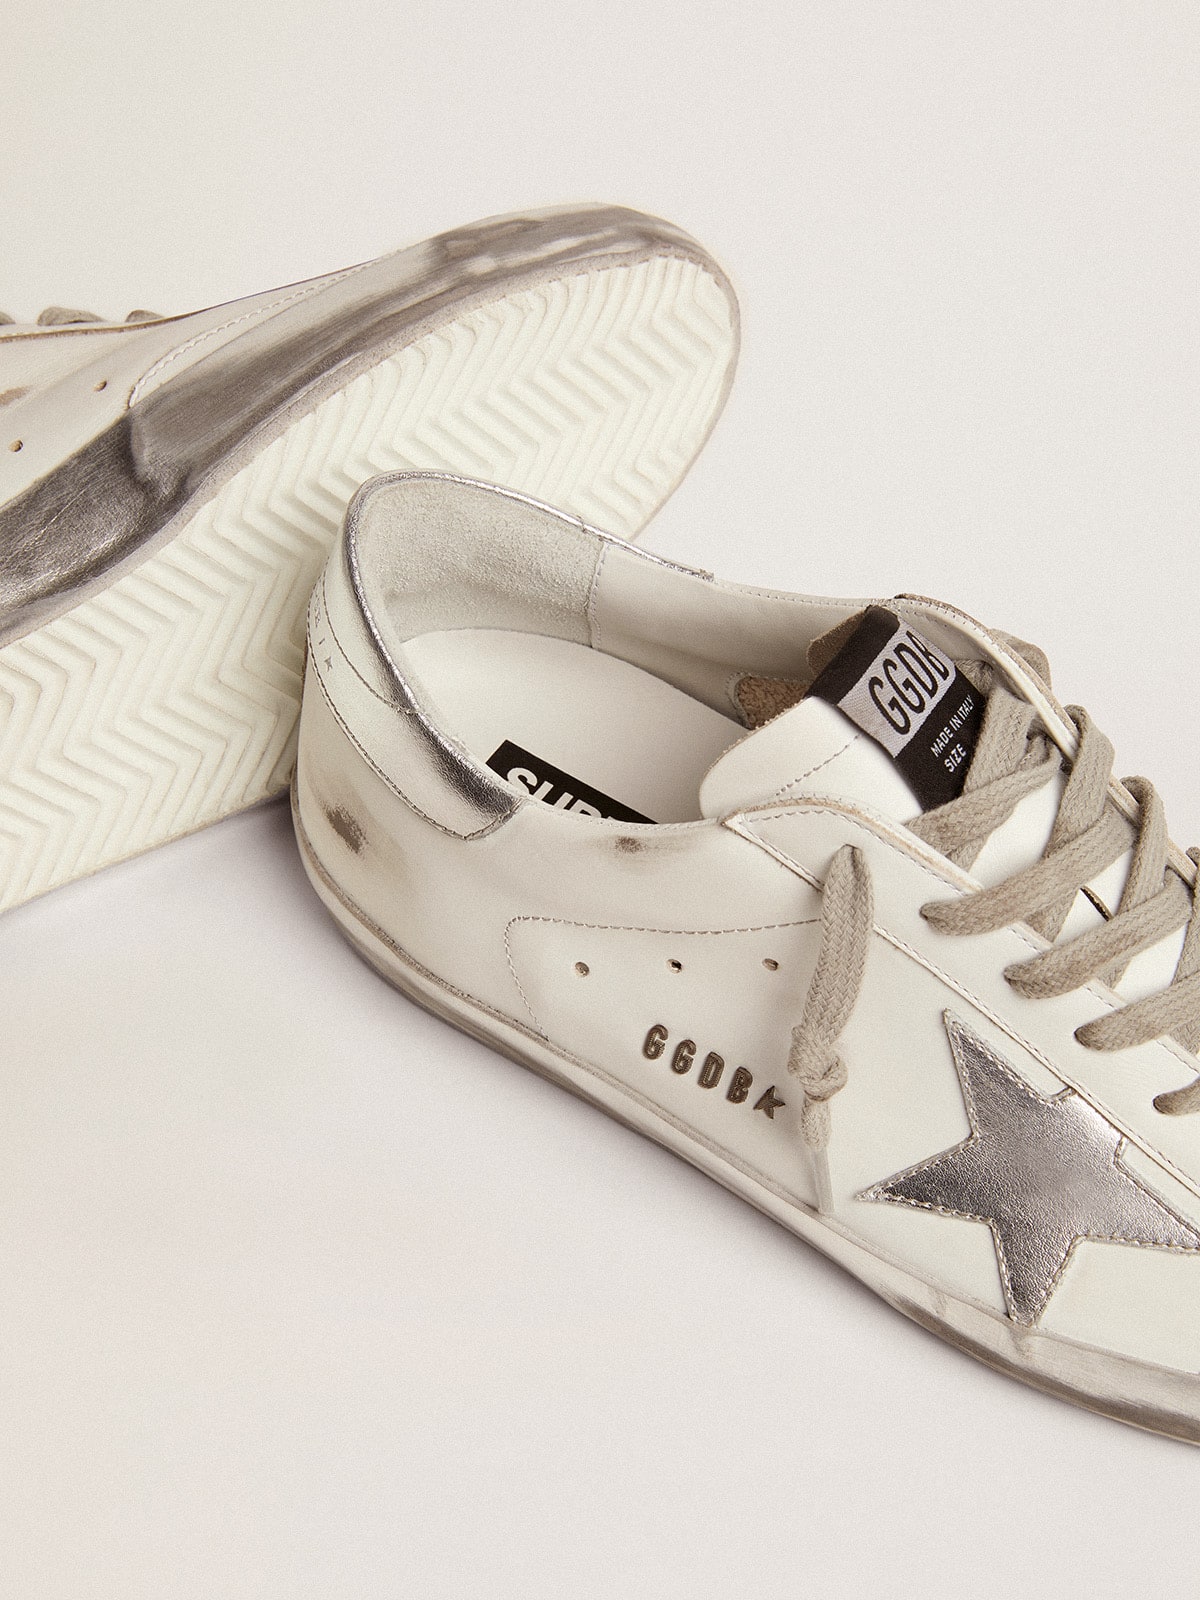 Men's Super-Star with laminated star and heel tab | Golden Goose